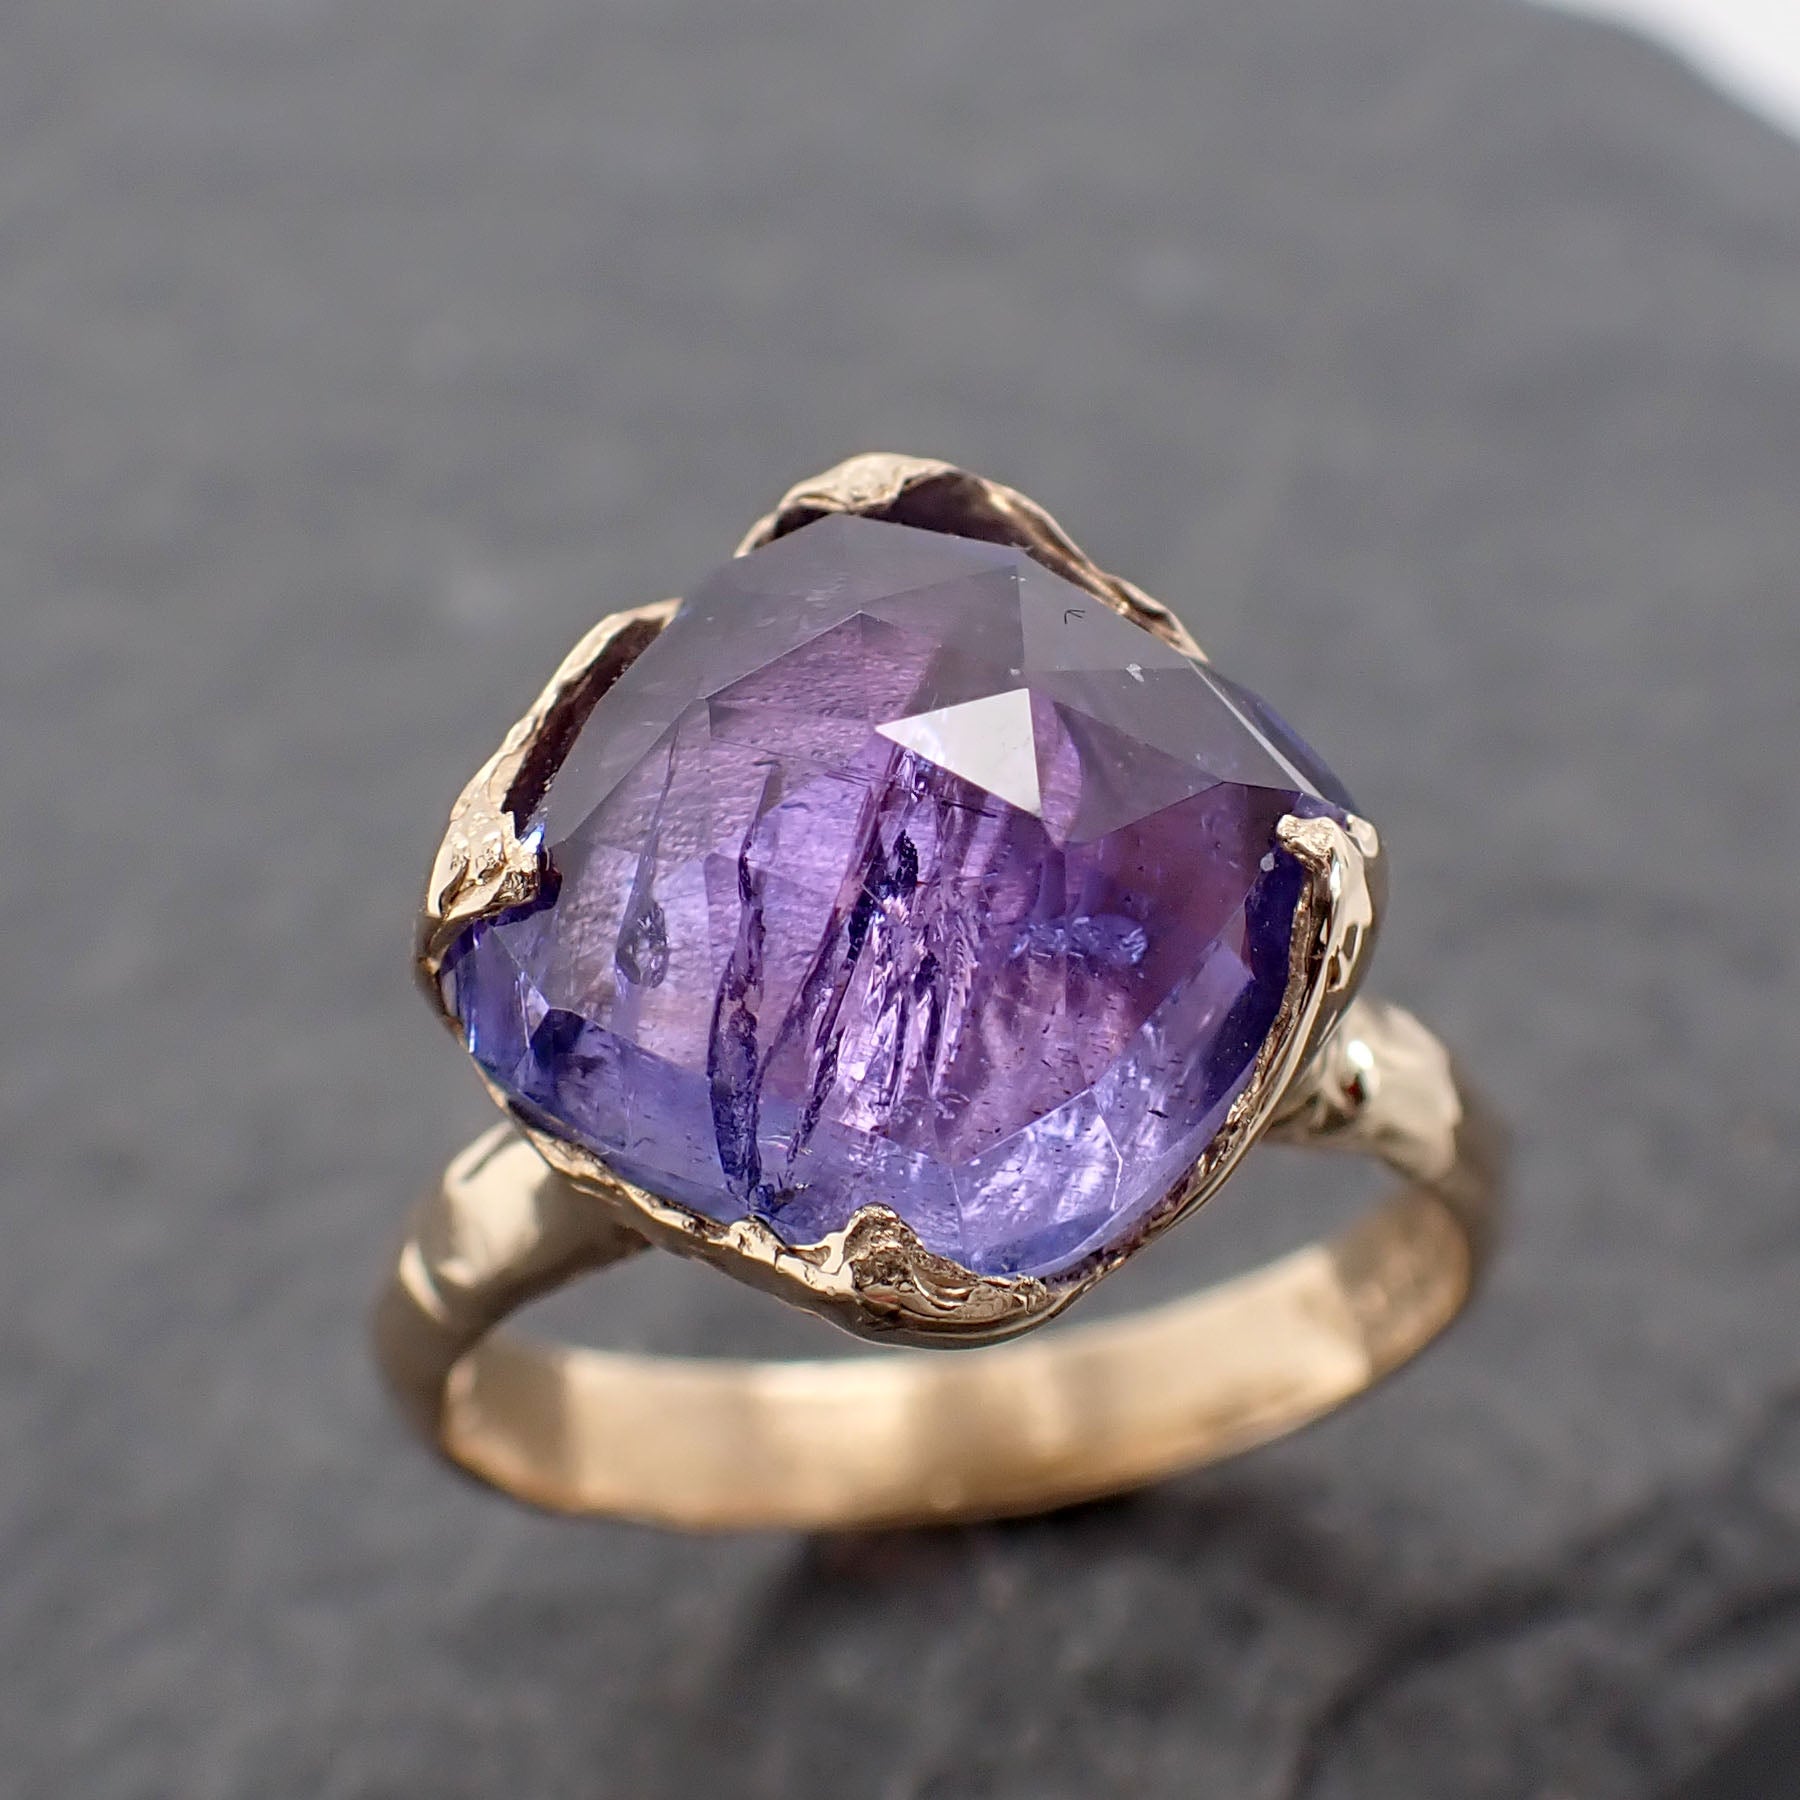 fancy cut tanzanite crystal solitaire 18k recycled yellow gold ring tanzanite stacking statement byangeline 2421 Alternative Engagement